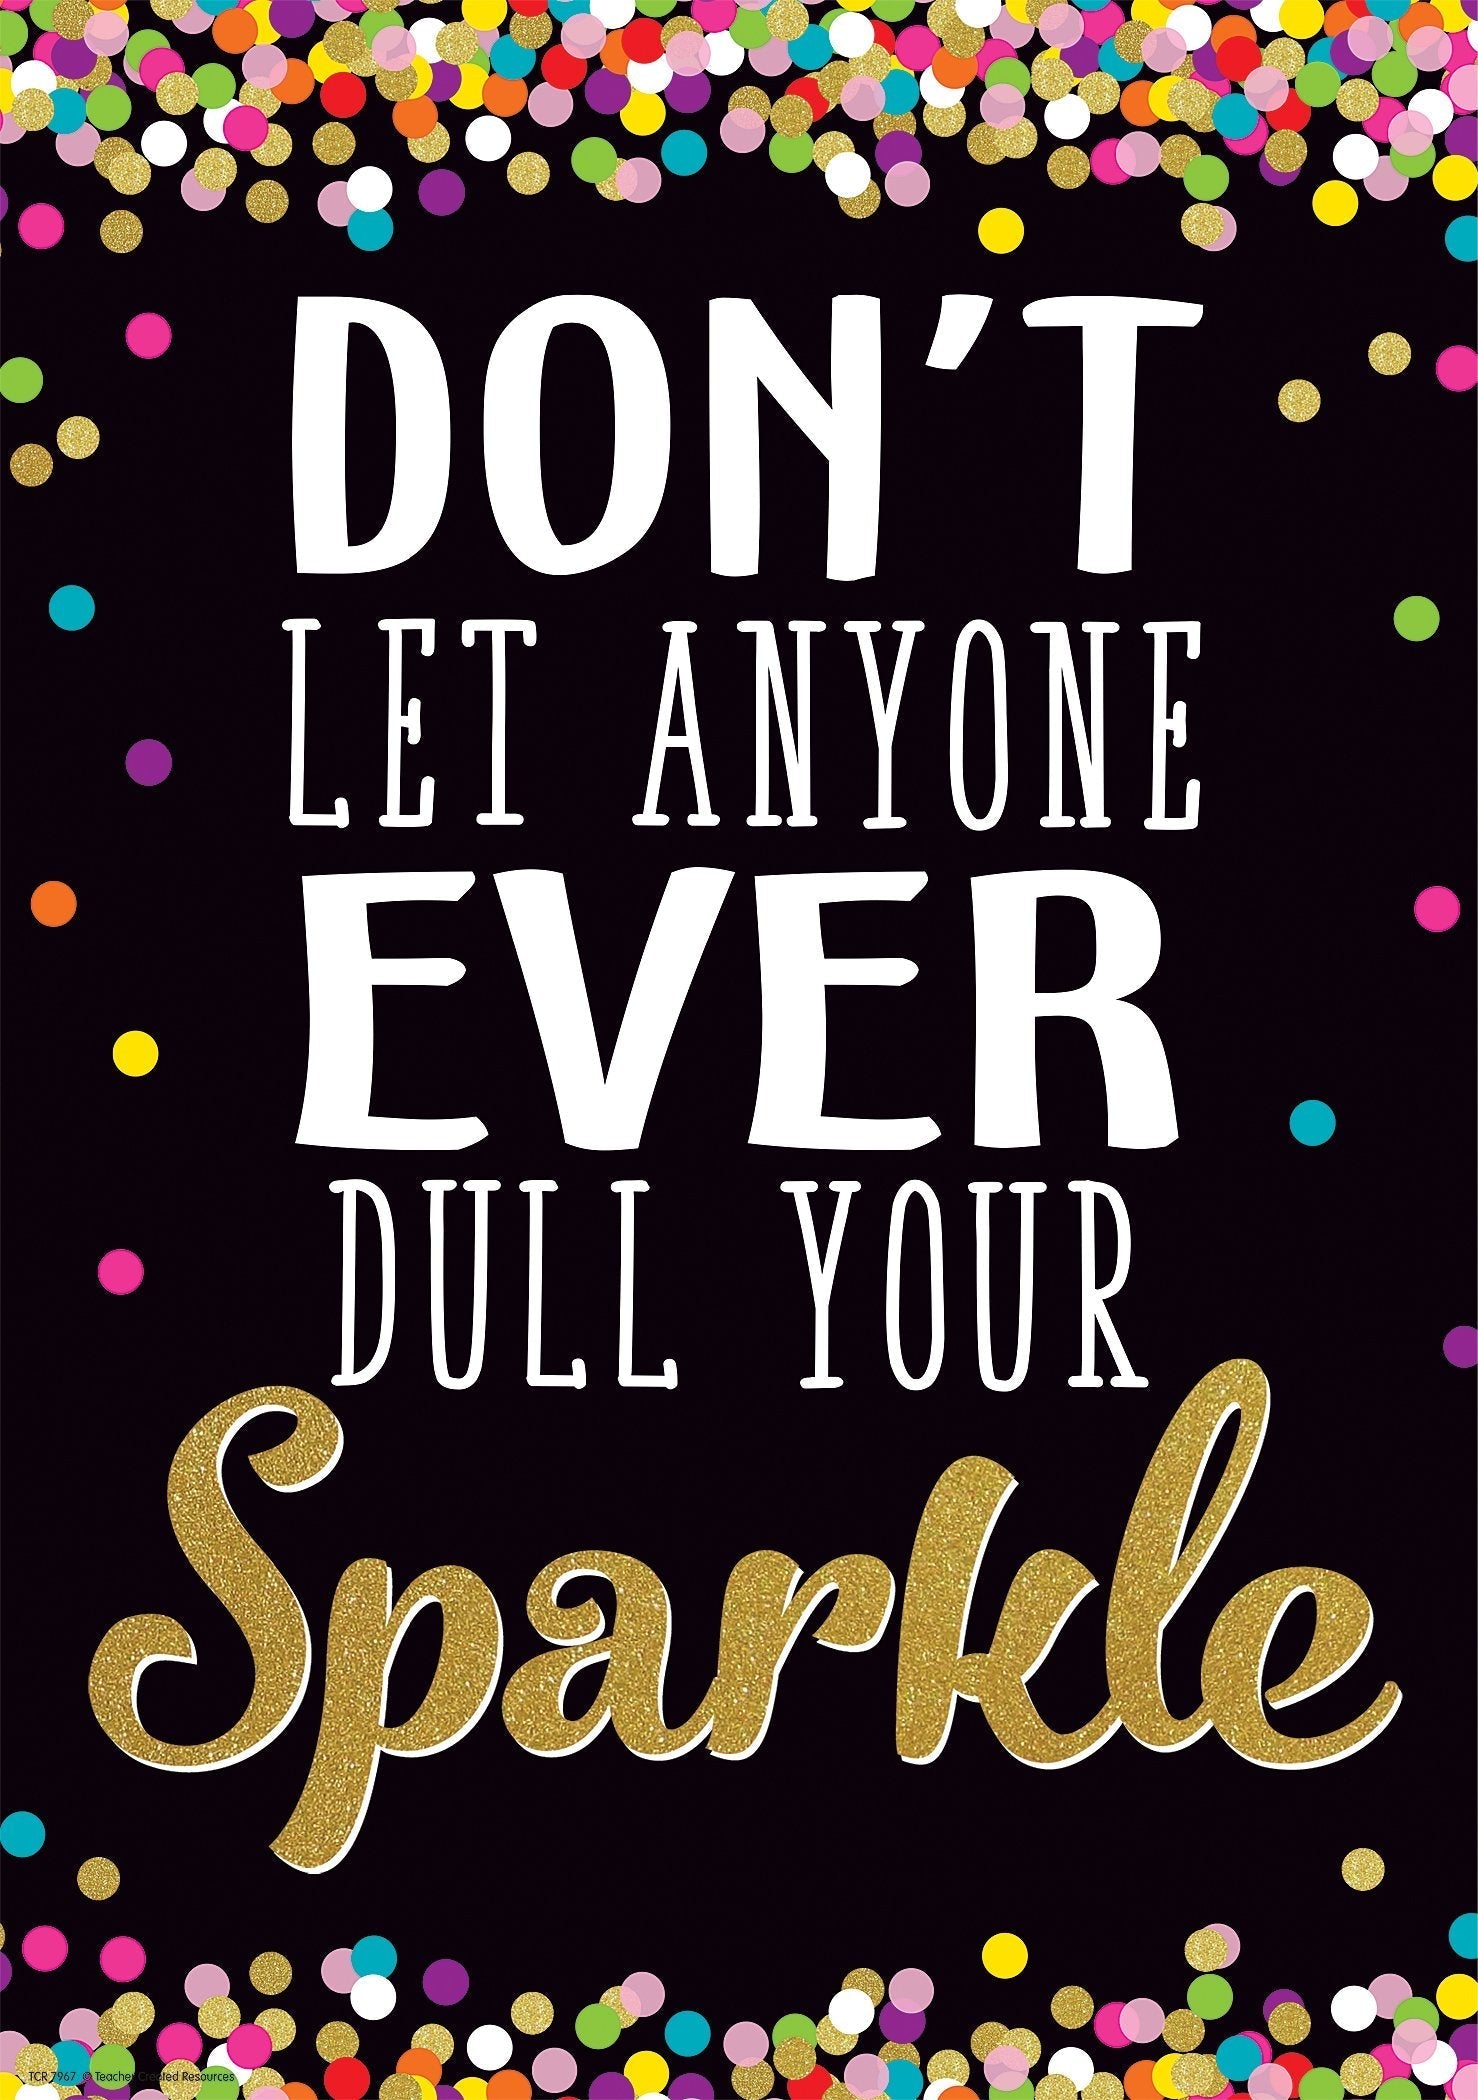 dont let anyone dull your sparkle